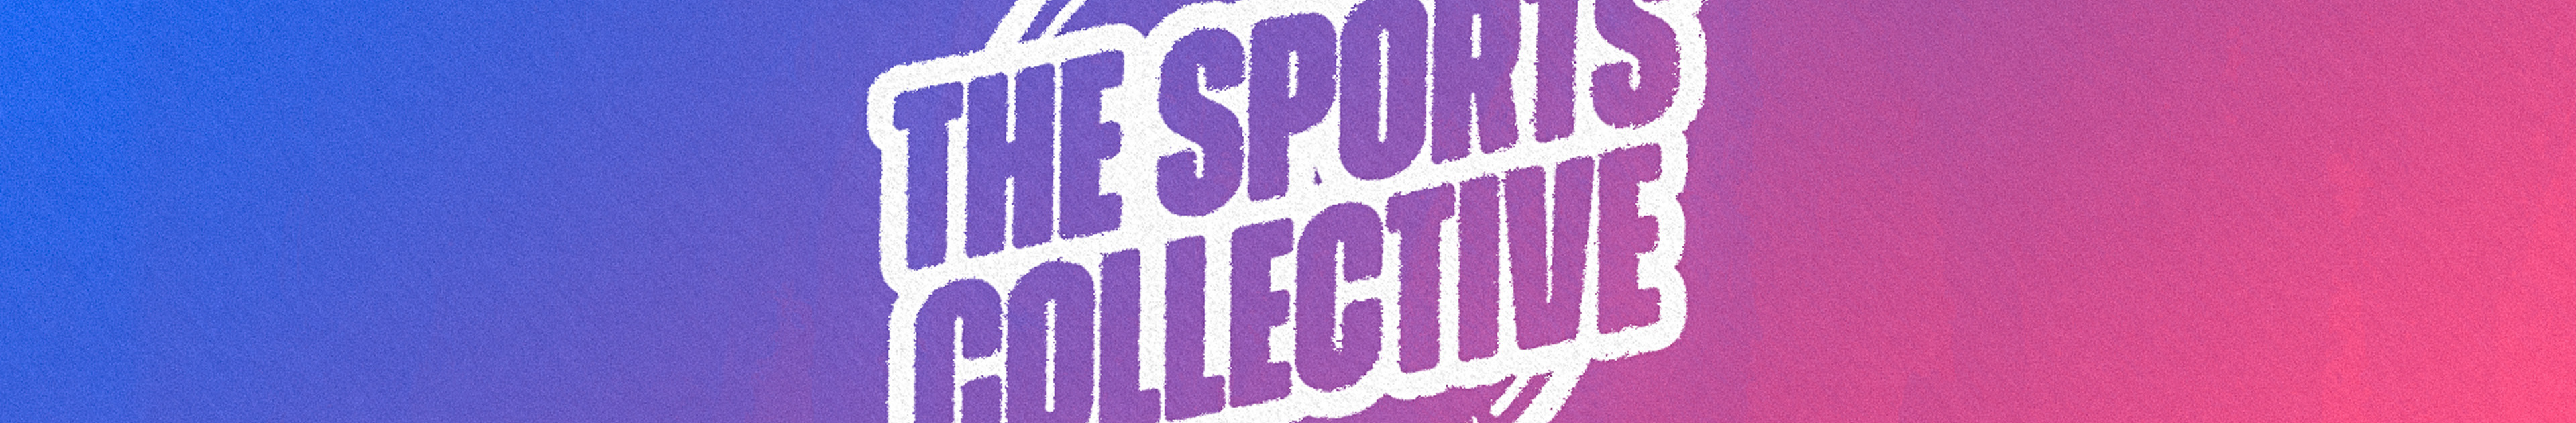 The Sports Collective's profile banner